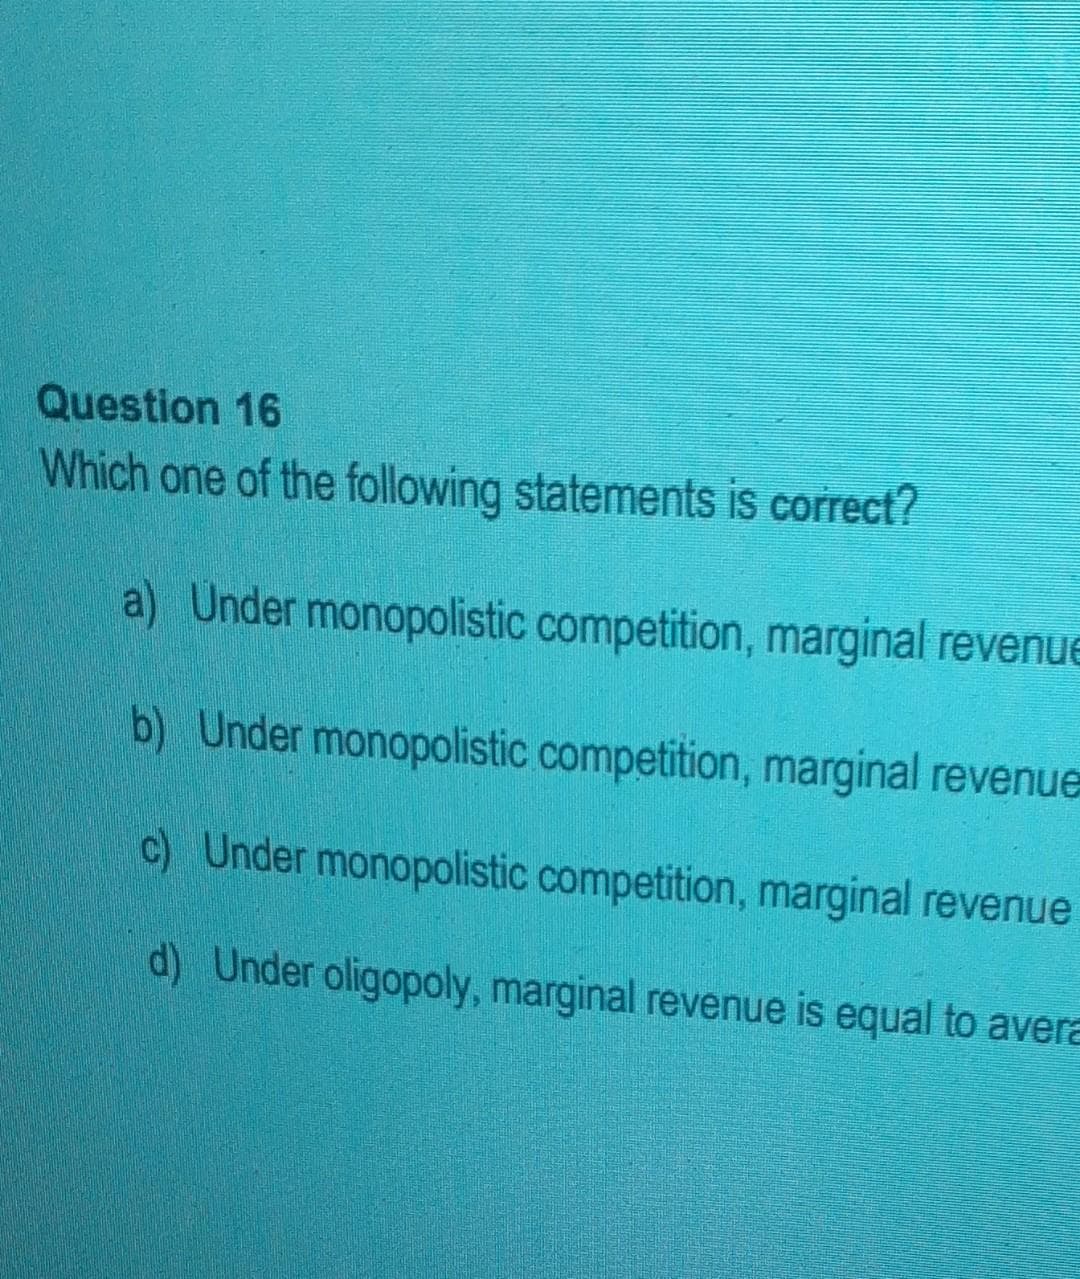 Question 16
Which one of the following statements is correct?
a) Under monopolistic competition, marginal revenue
b) Under monopolistic competition, marginal revenue
c) Under monopolistic competition, marginal revenue
d) Under oligopoly, marginal revenue is equal to avera